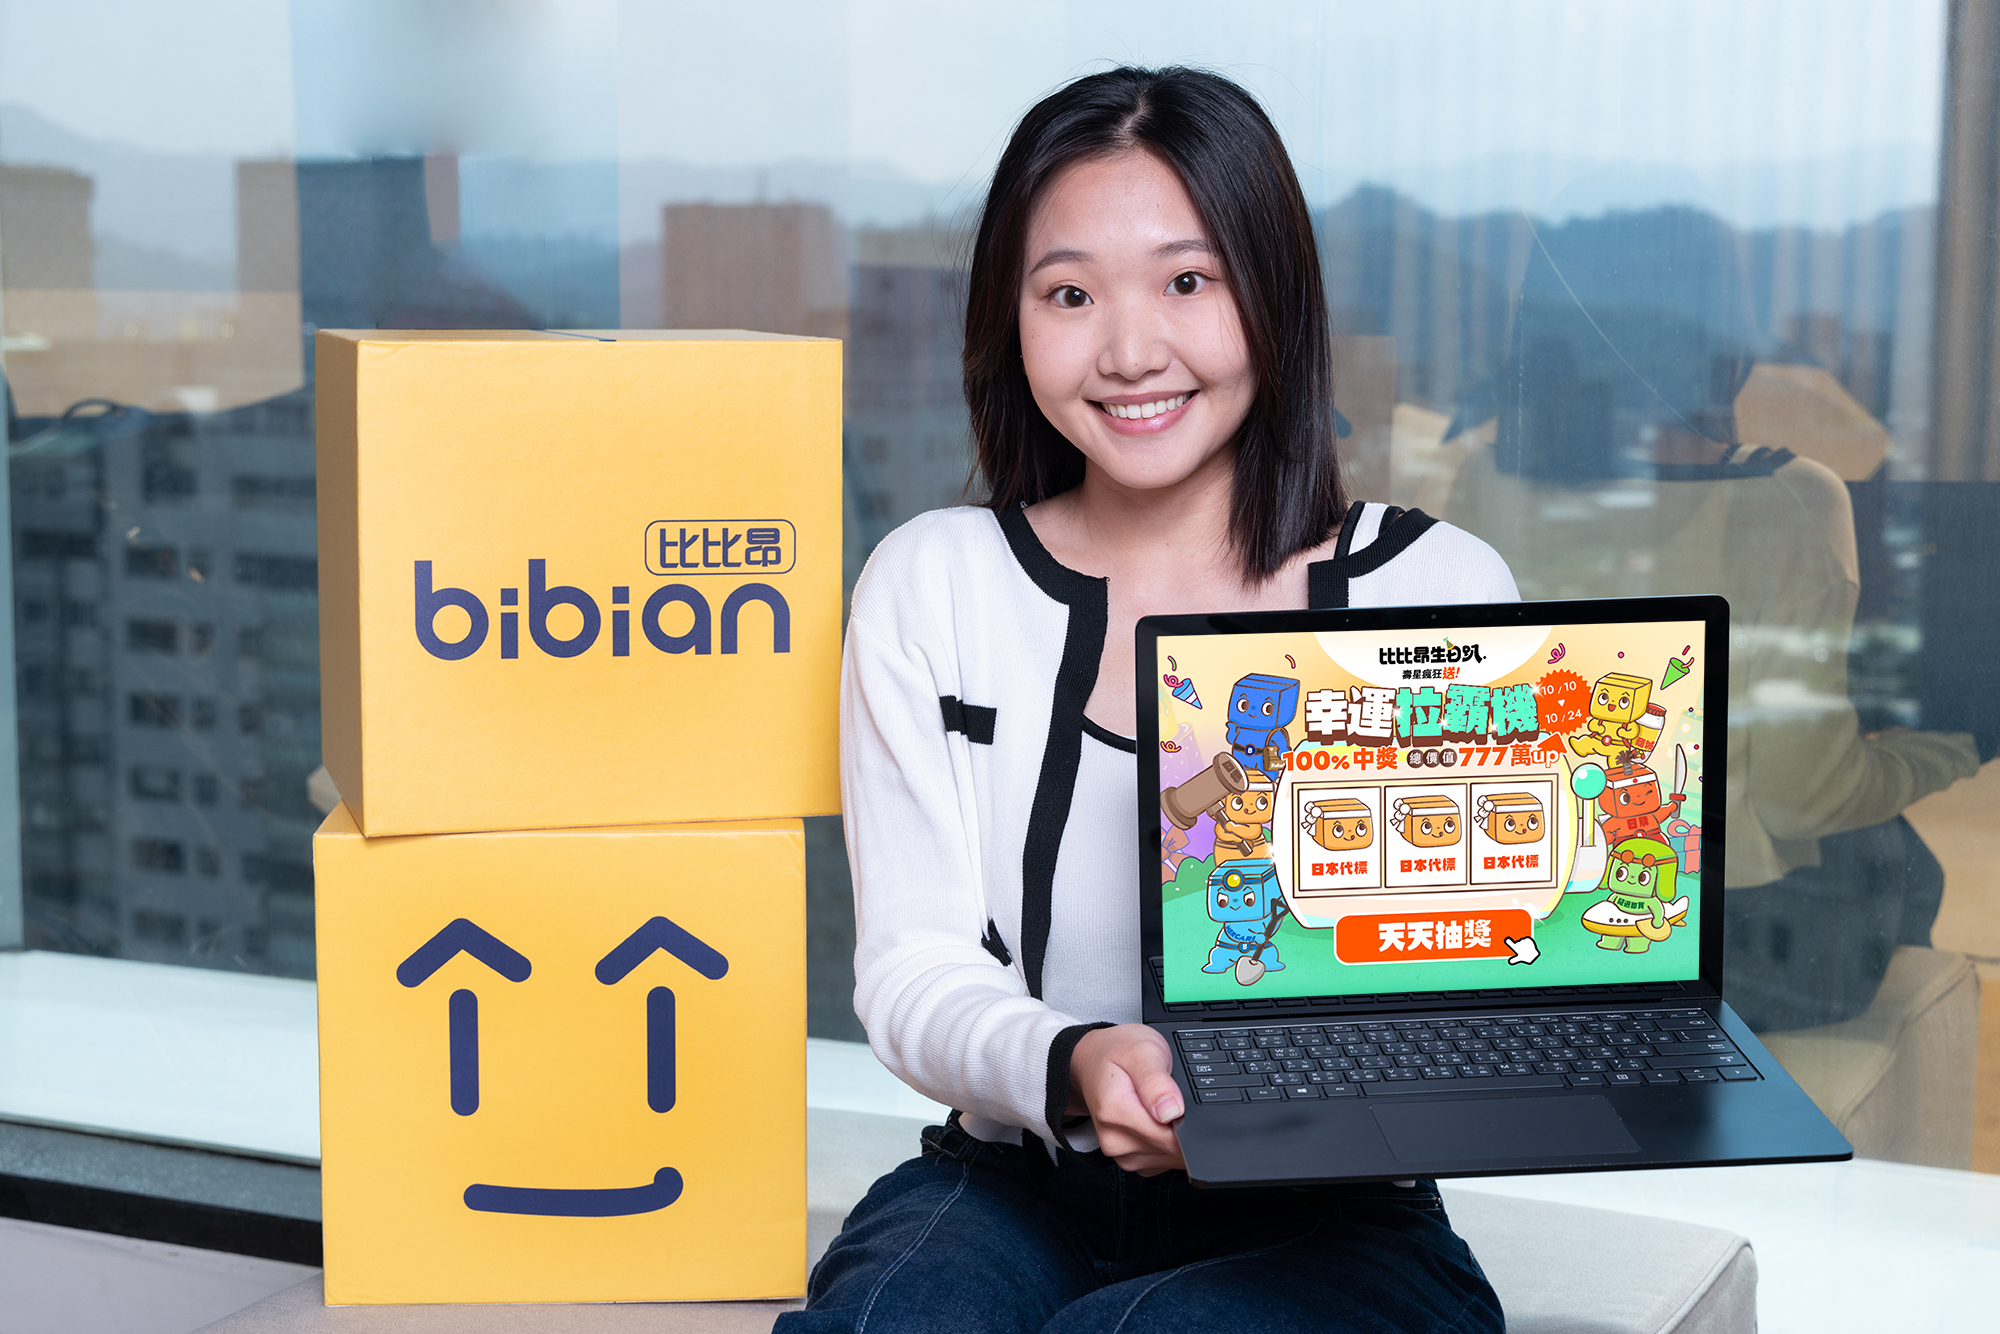 Cross-Border Online Shopping Experience Is Upgraded! Bibian Launches Two Brand New Services, Speedy Delivery and FamilyMart In-Store Pickup